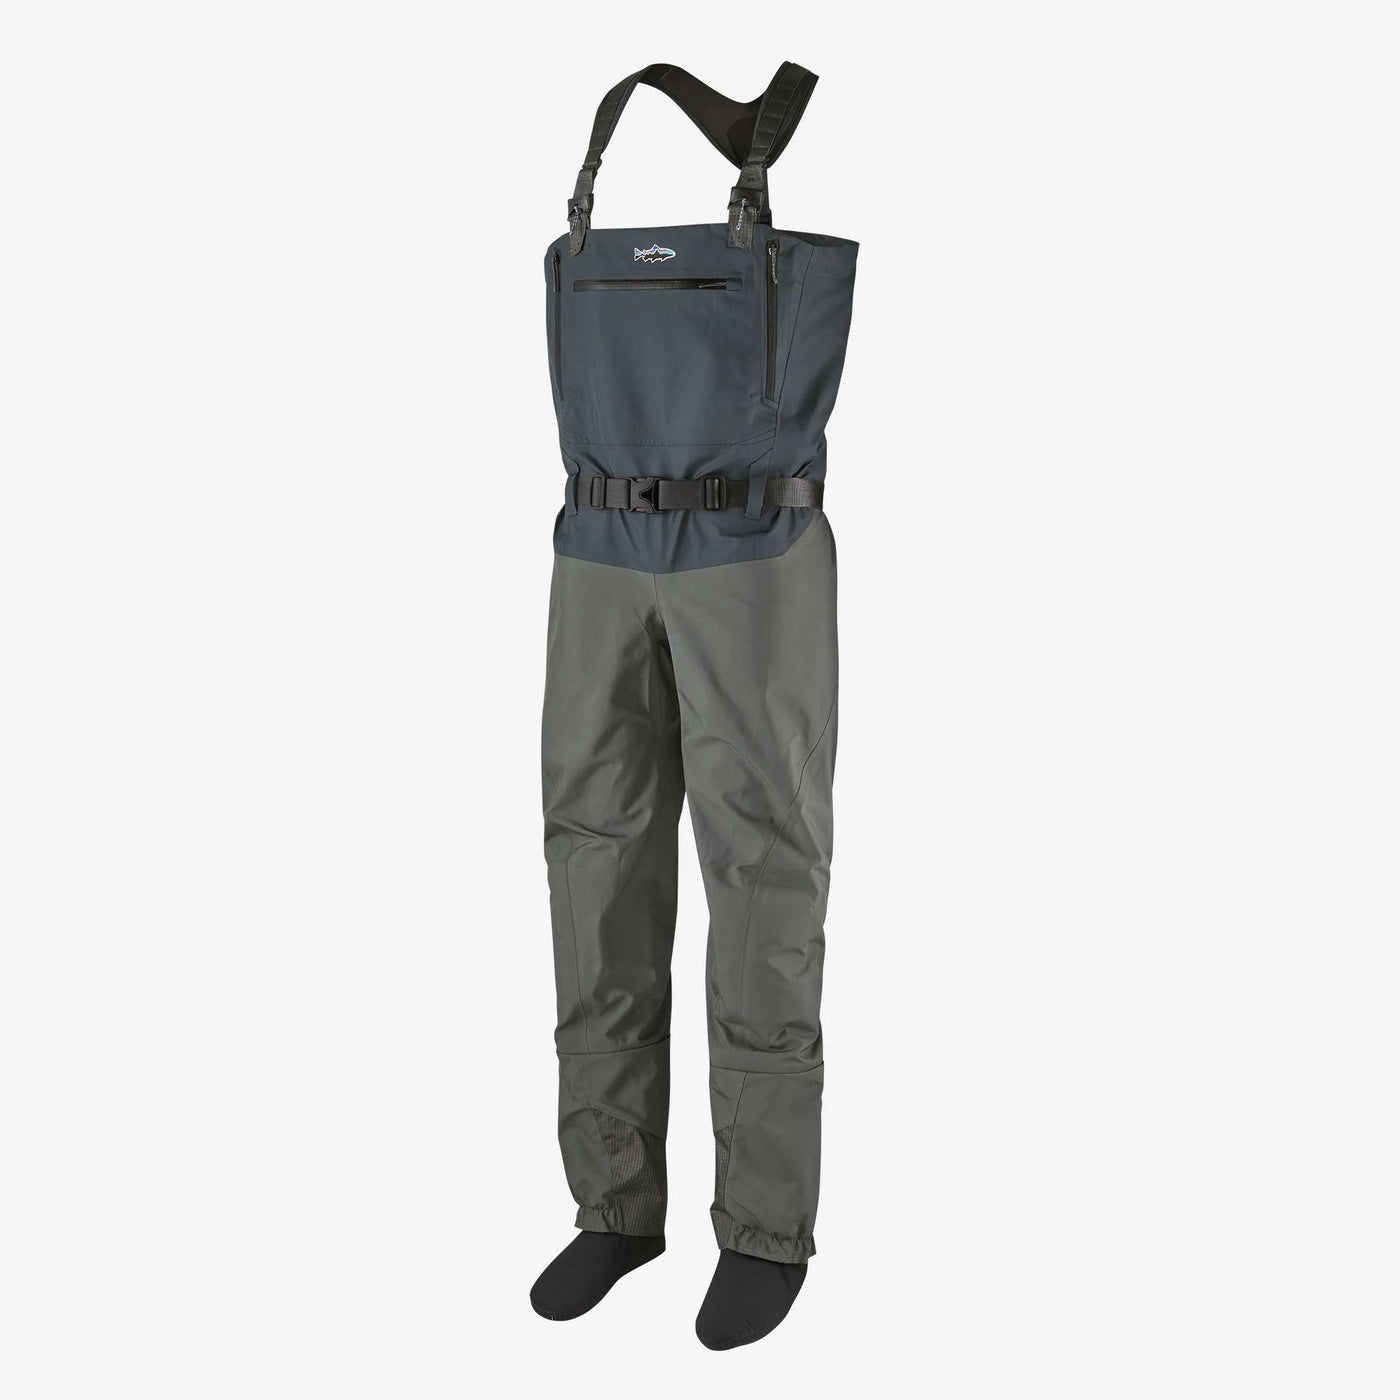 Patagonia Men's Swiftcurrent Expedition Waders - Conejos River Anglers